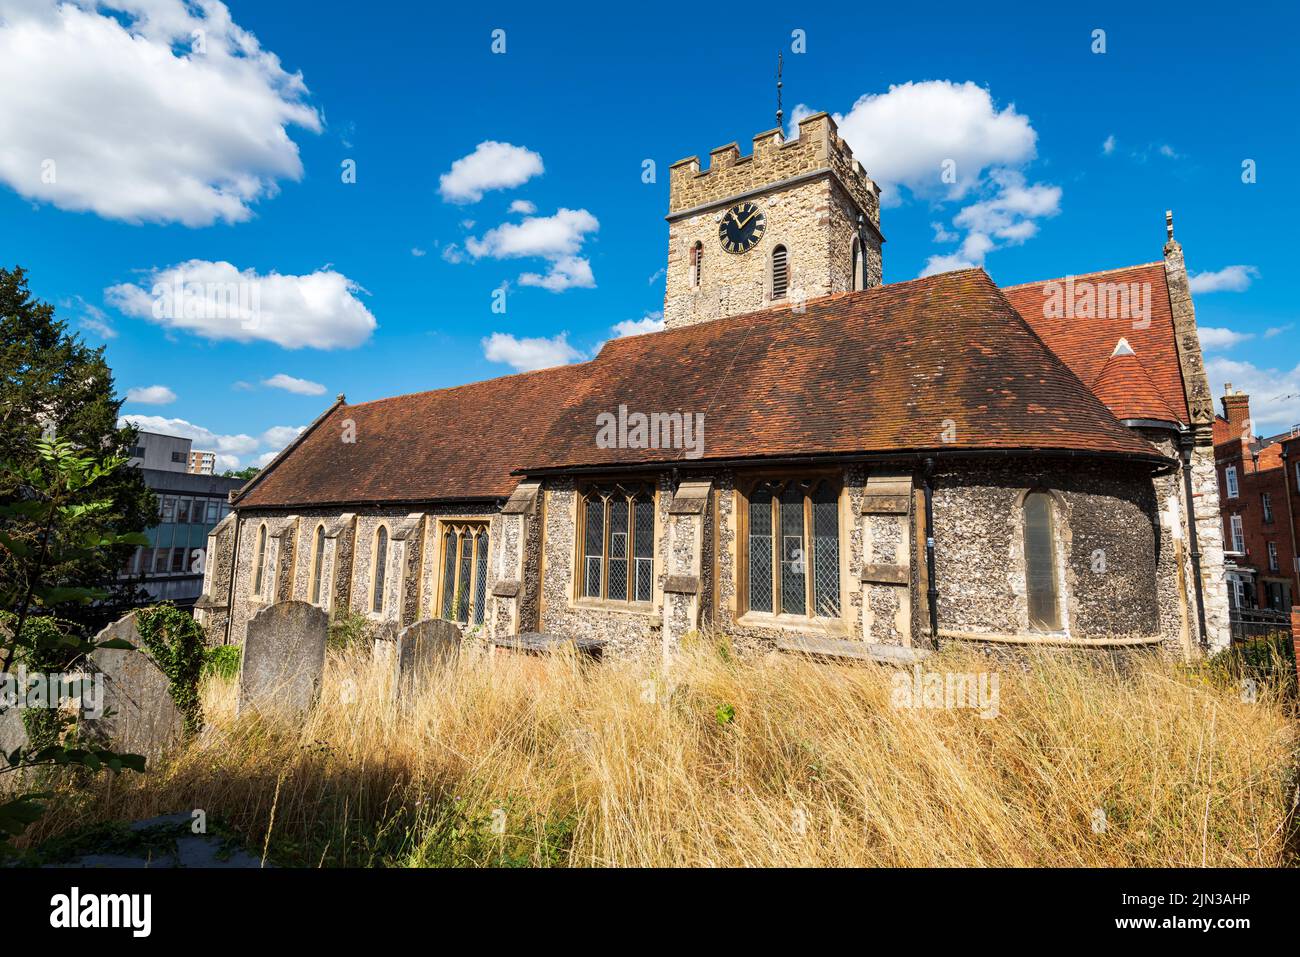 St Mary's church on Quarry Street, Guildford, Surrey, England, UK Stock Photo